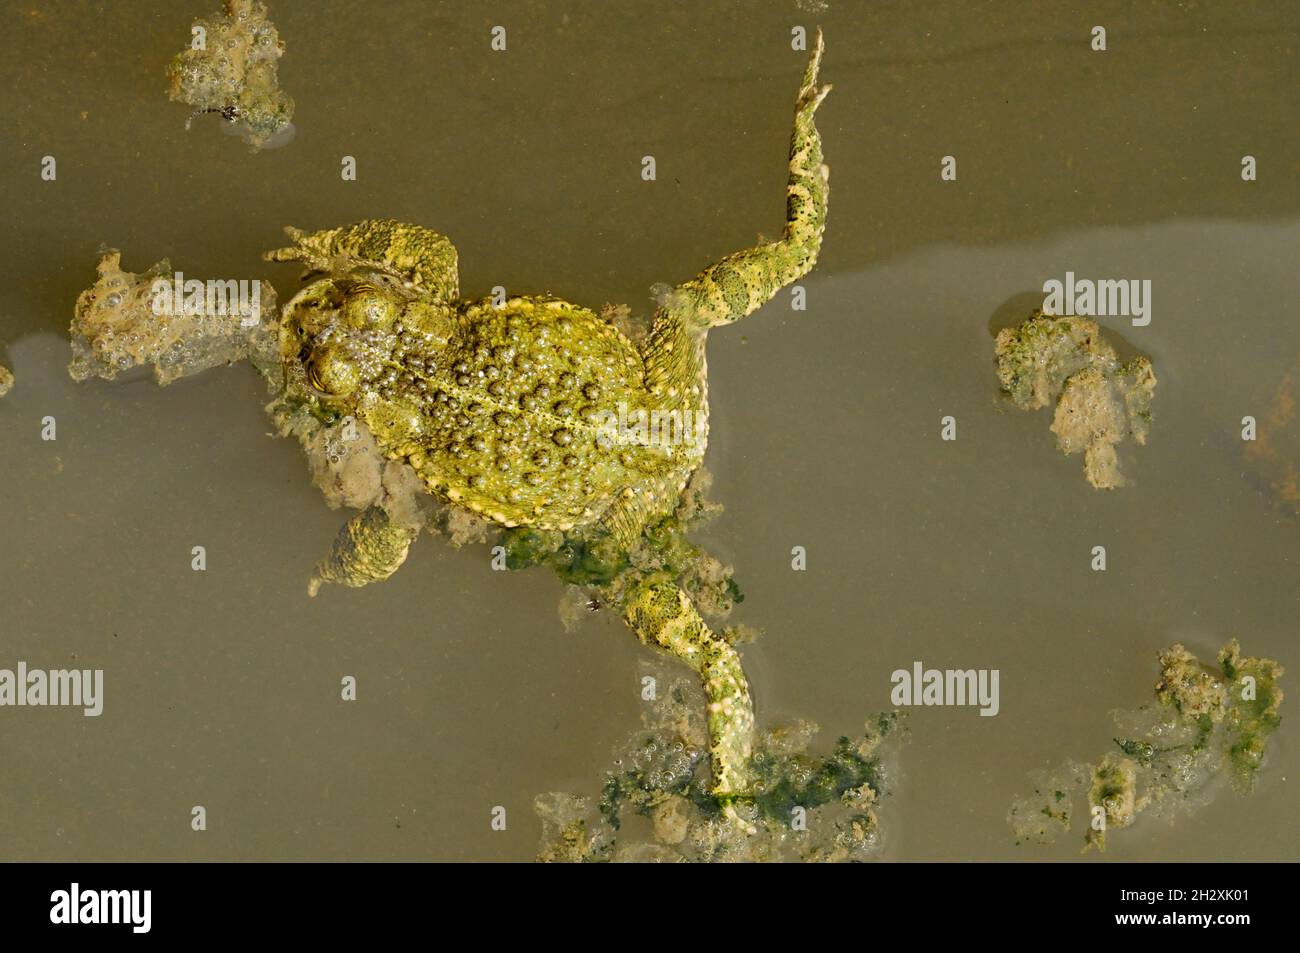 Epidalea calamita or Runner toad, a species of frog in the Bufonidae family. Stock Photo